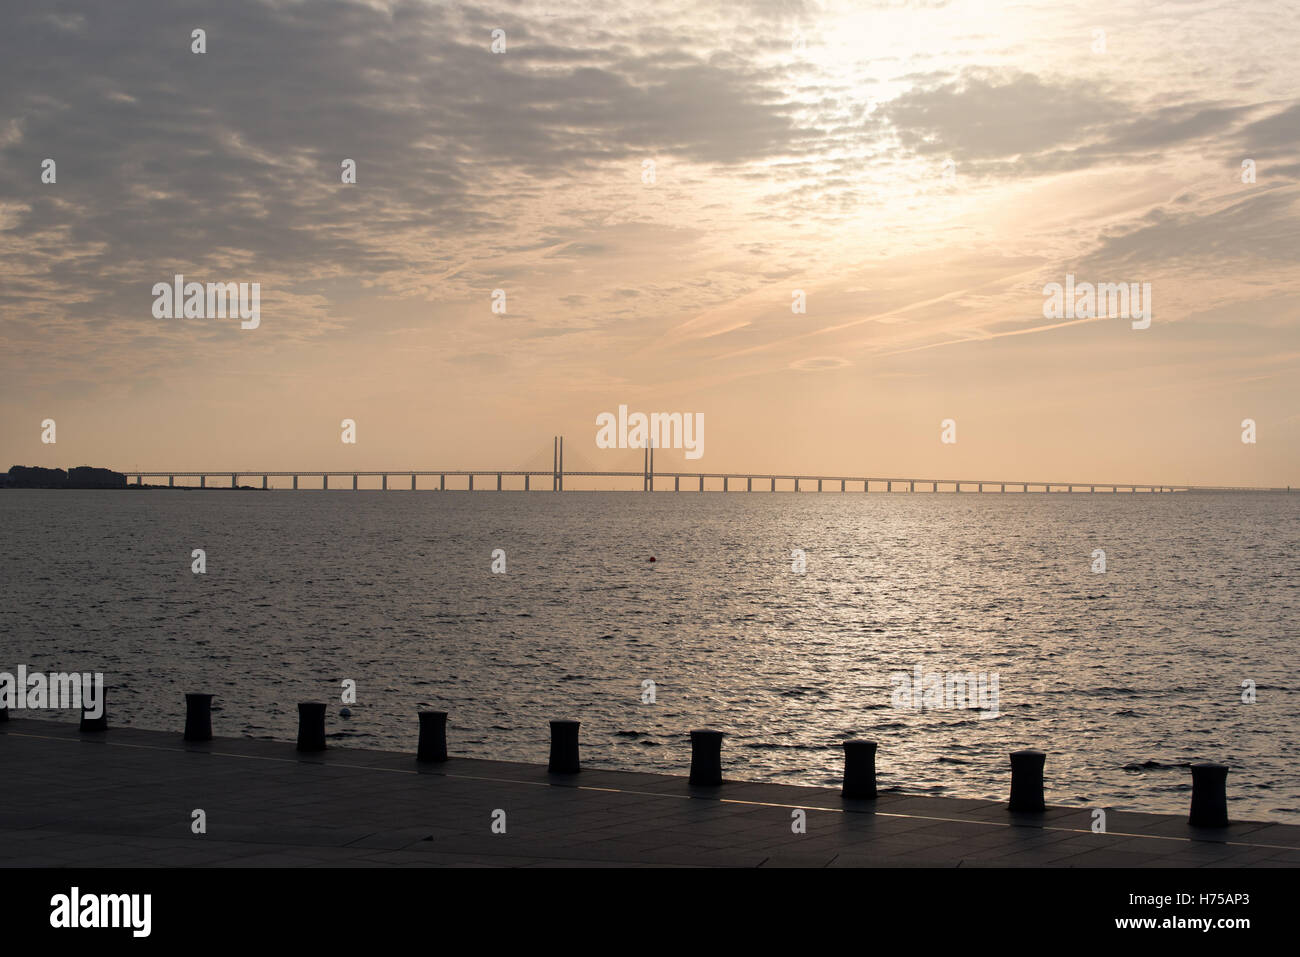 The Oresund Bridge between Denmark and Sweden,view from Malmo,Europe Stock Photo